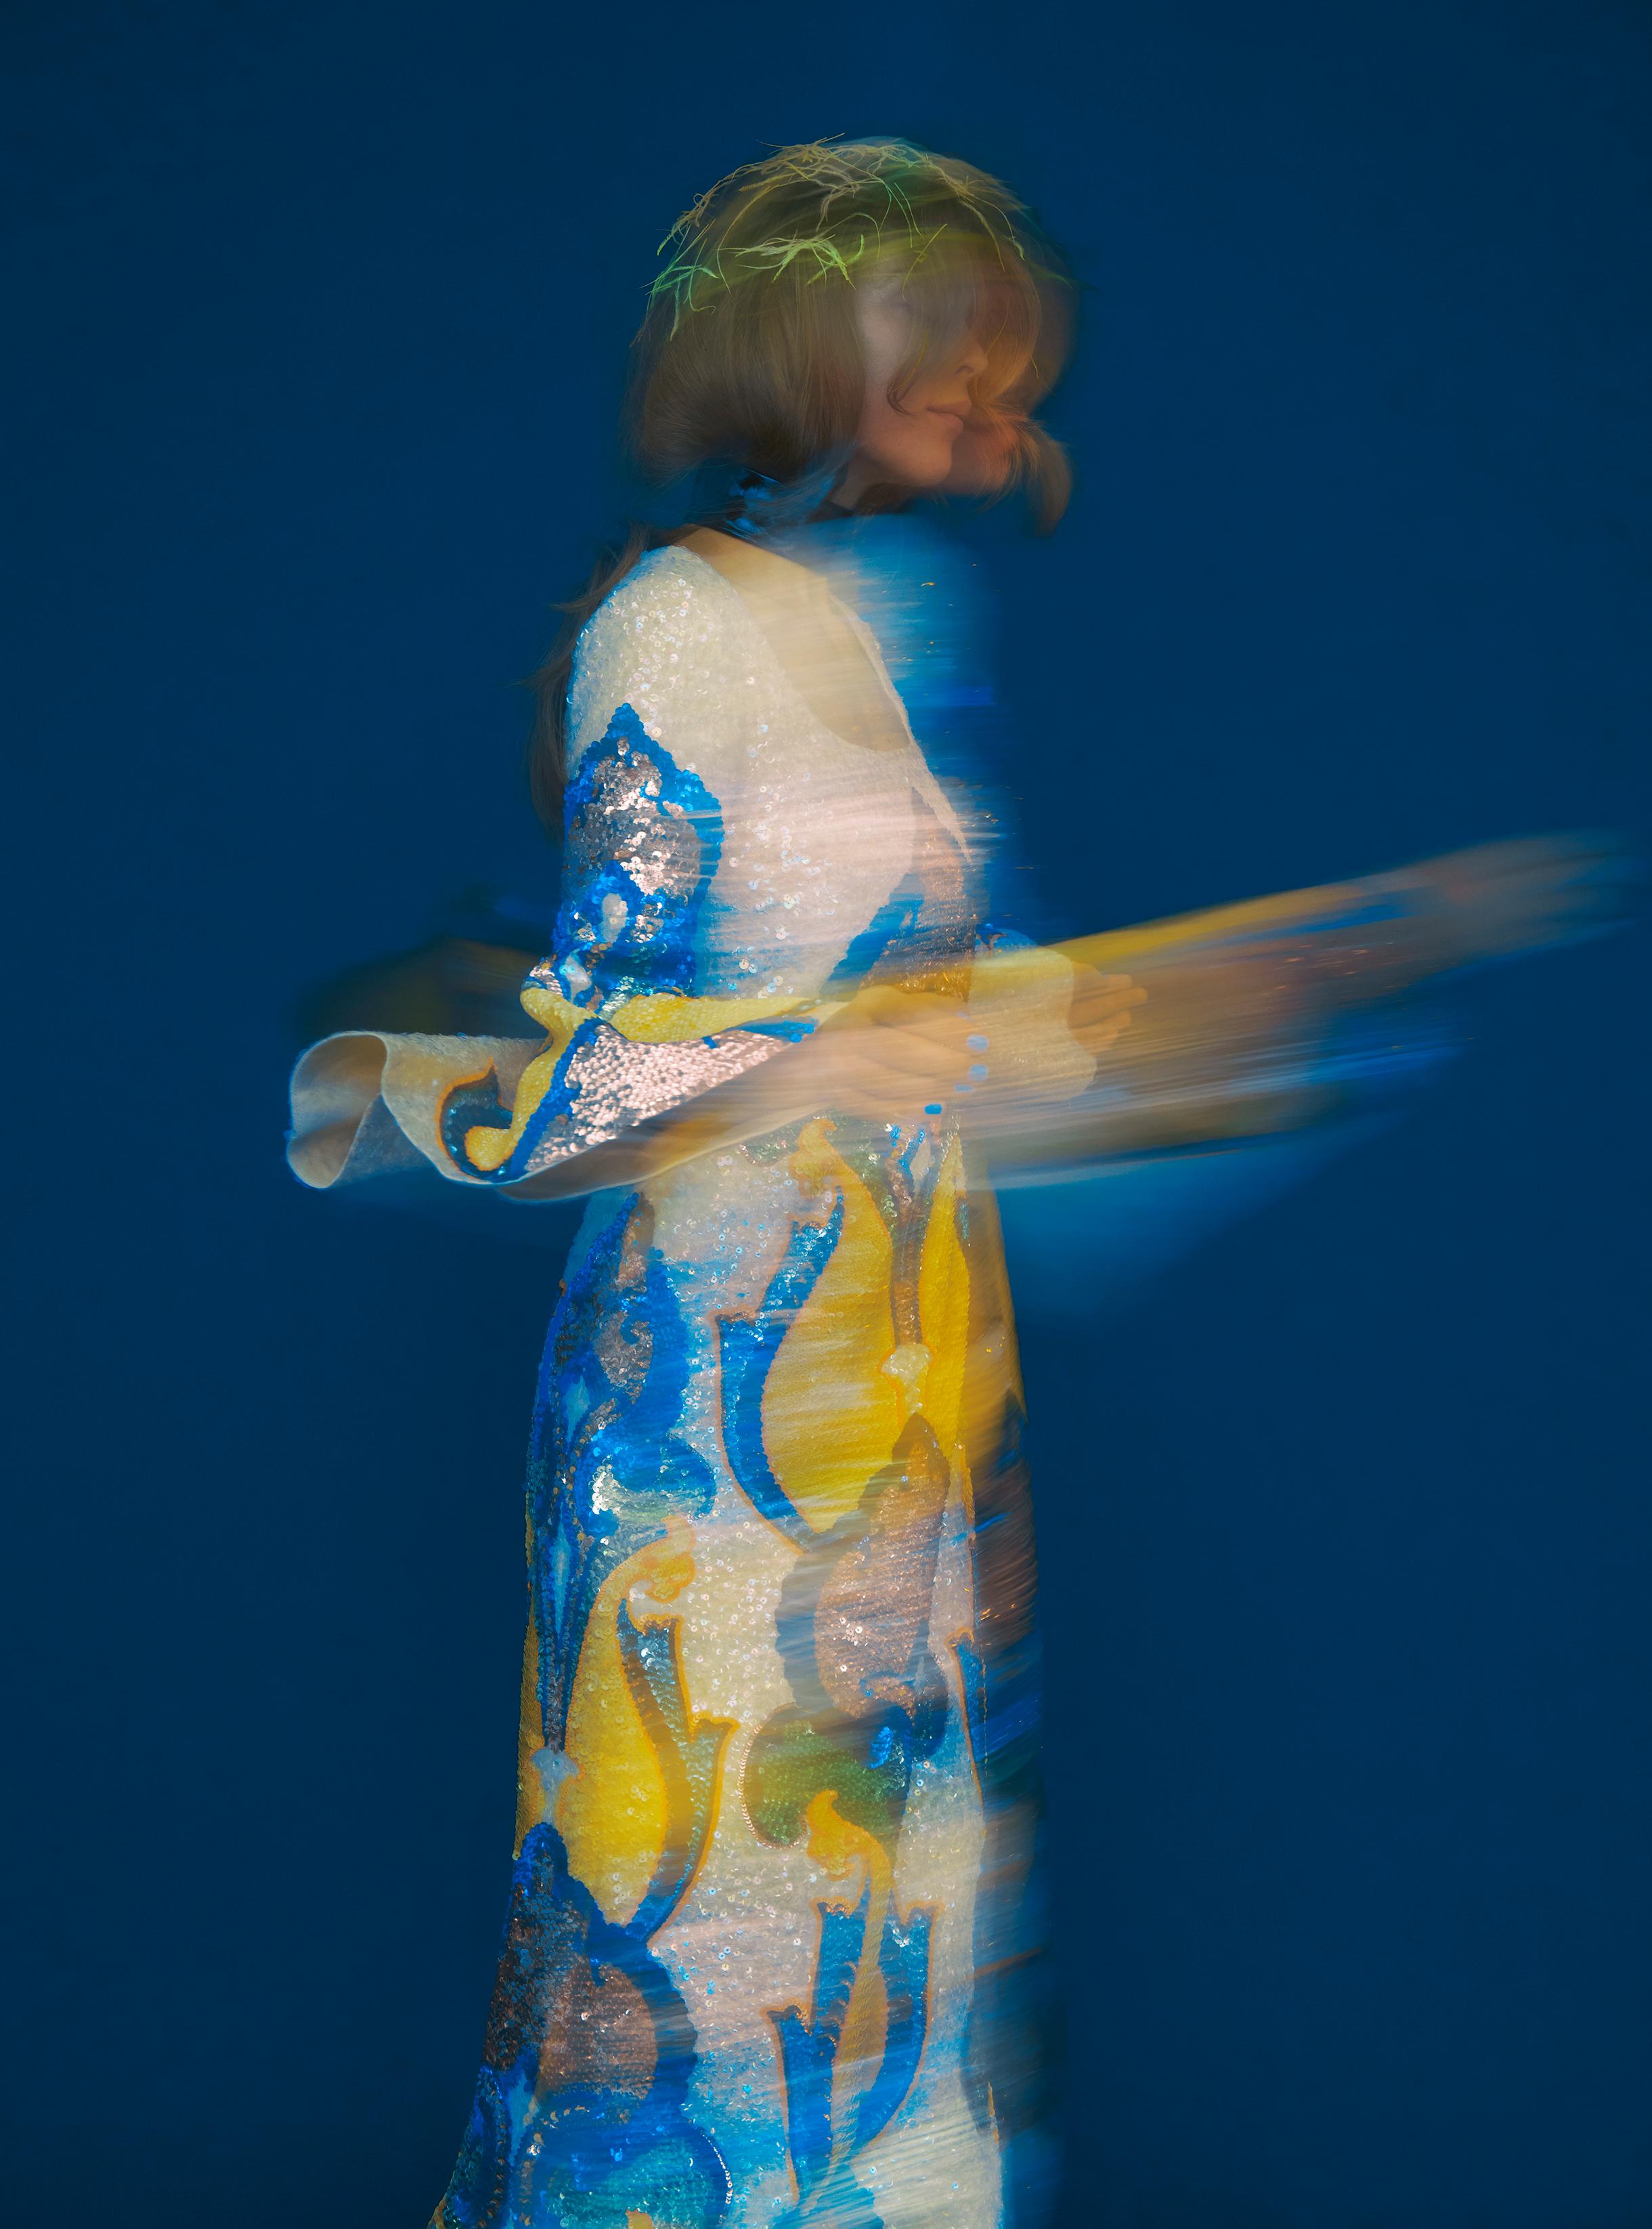 Erik MADIGAN HECK (*1983, United States)
Untitled, The Garden (Blue & Yellow Studio), The Garden, 2019
Chromogenic print
Sheet 152.4 x 101.6 cm (60 x 40 in.)
Edition of 9, plus 2 AP; Ed. no. 1/9
Print only


Originally from Excelsior, Minnesota,